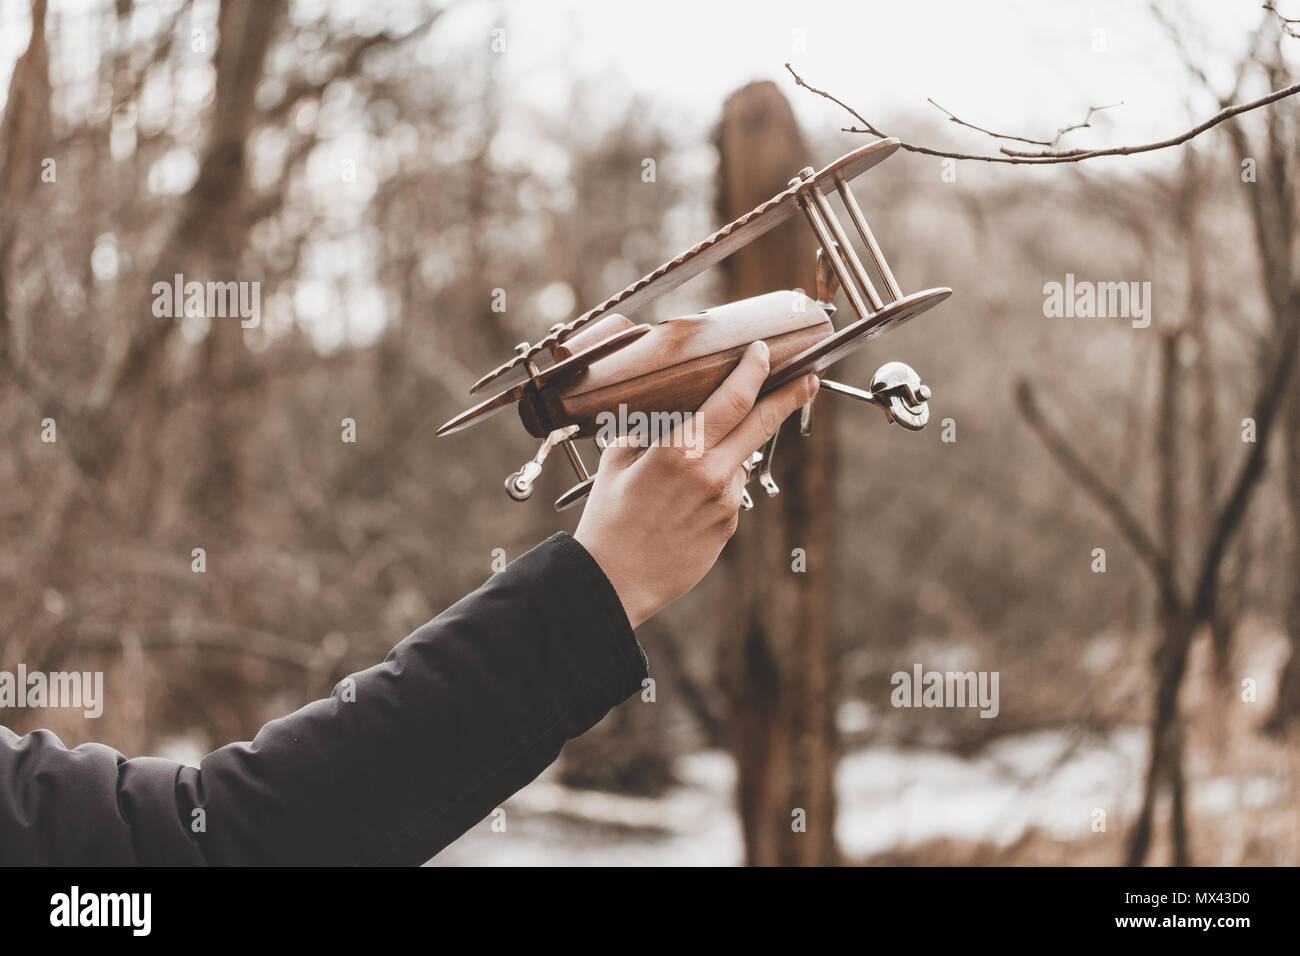 A man playing with a wooden airplane model, Denmark, Europe. Stock Photo